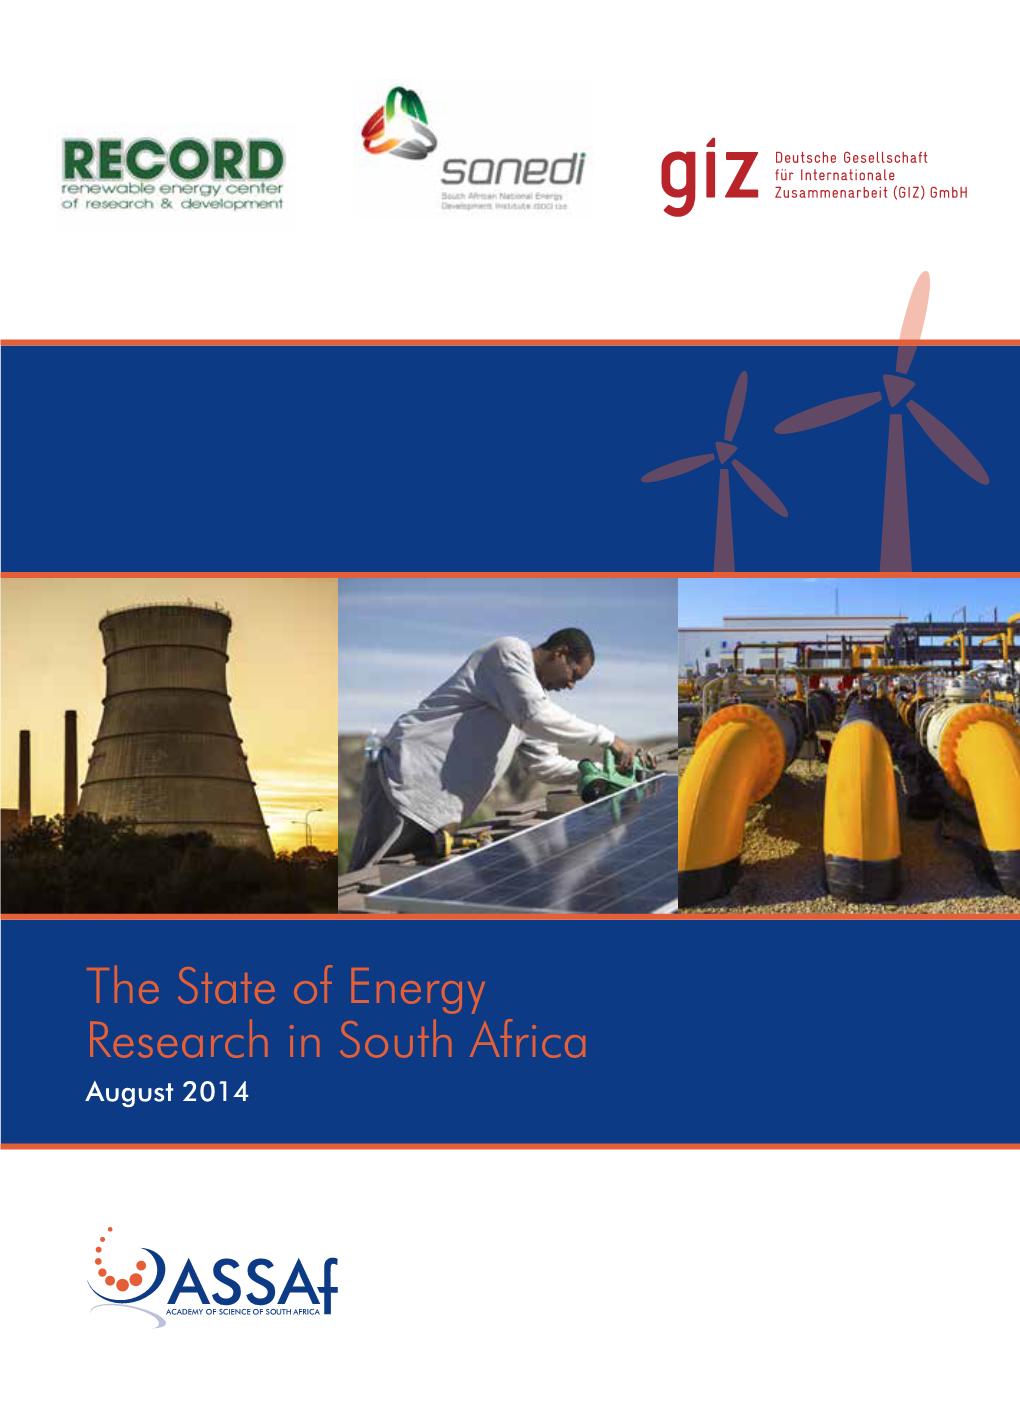 The State of Energy Research in South Africa August 2014